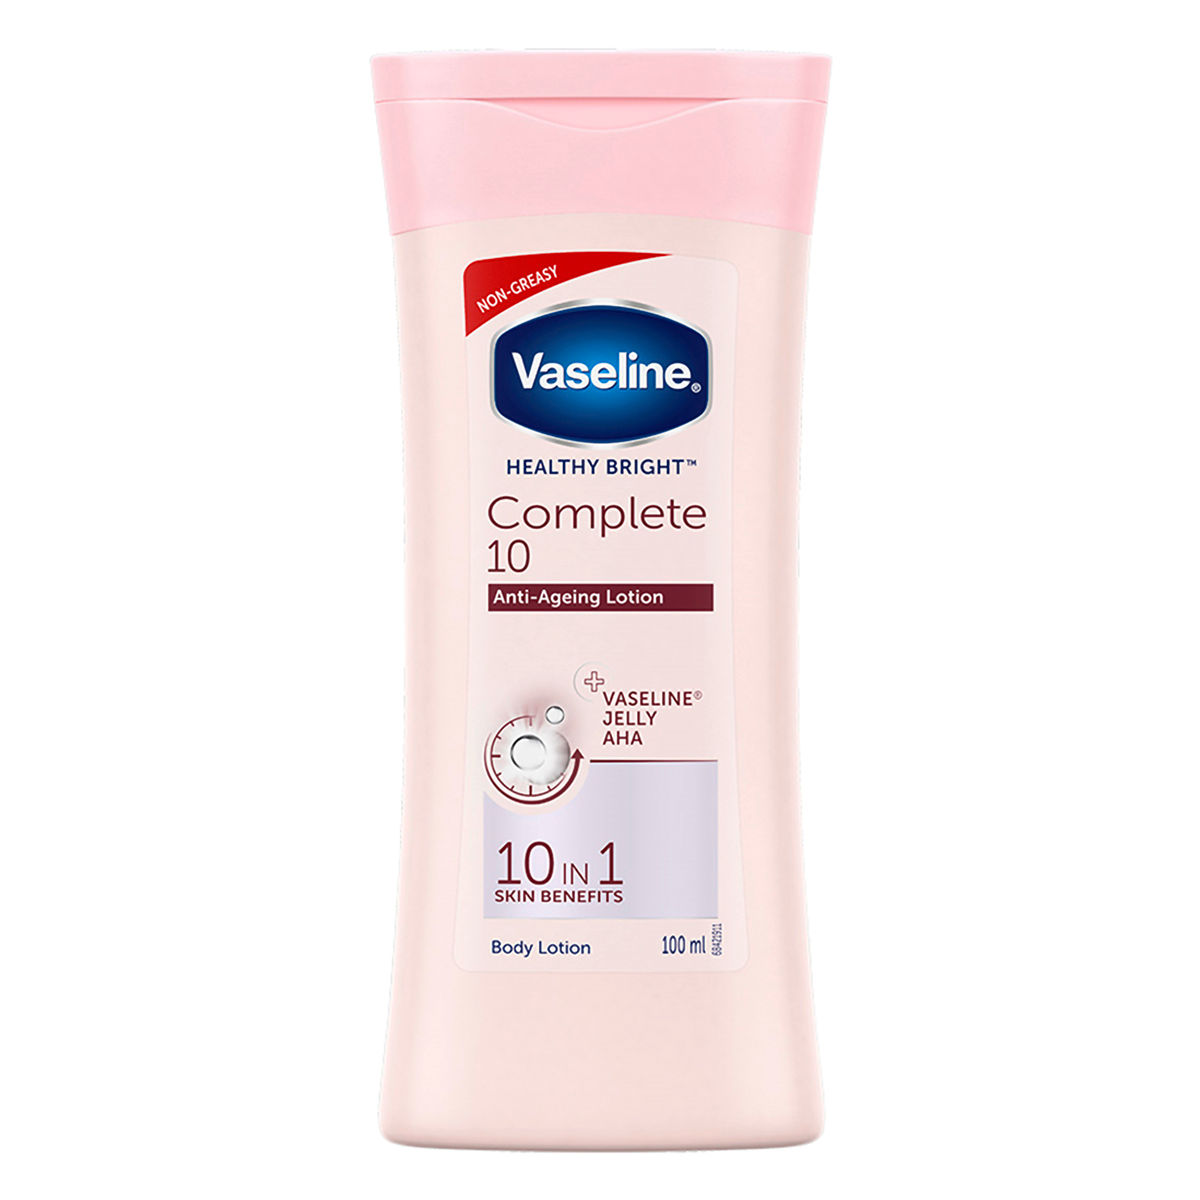 Buy Vaseline Healthy Bright Complete10 Anti-Ageing Lotion, 100 ml Online